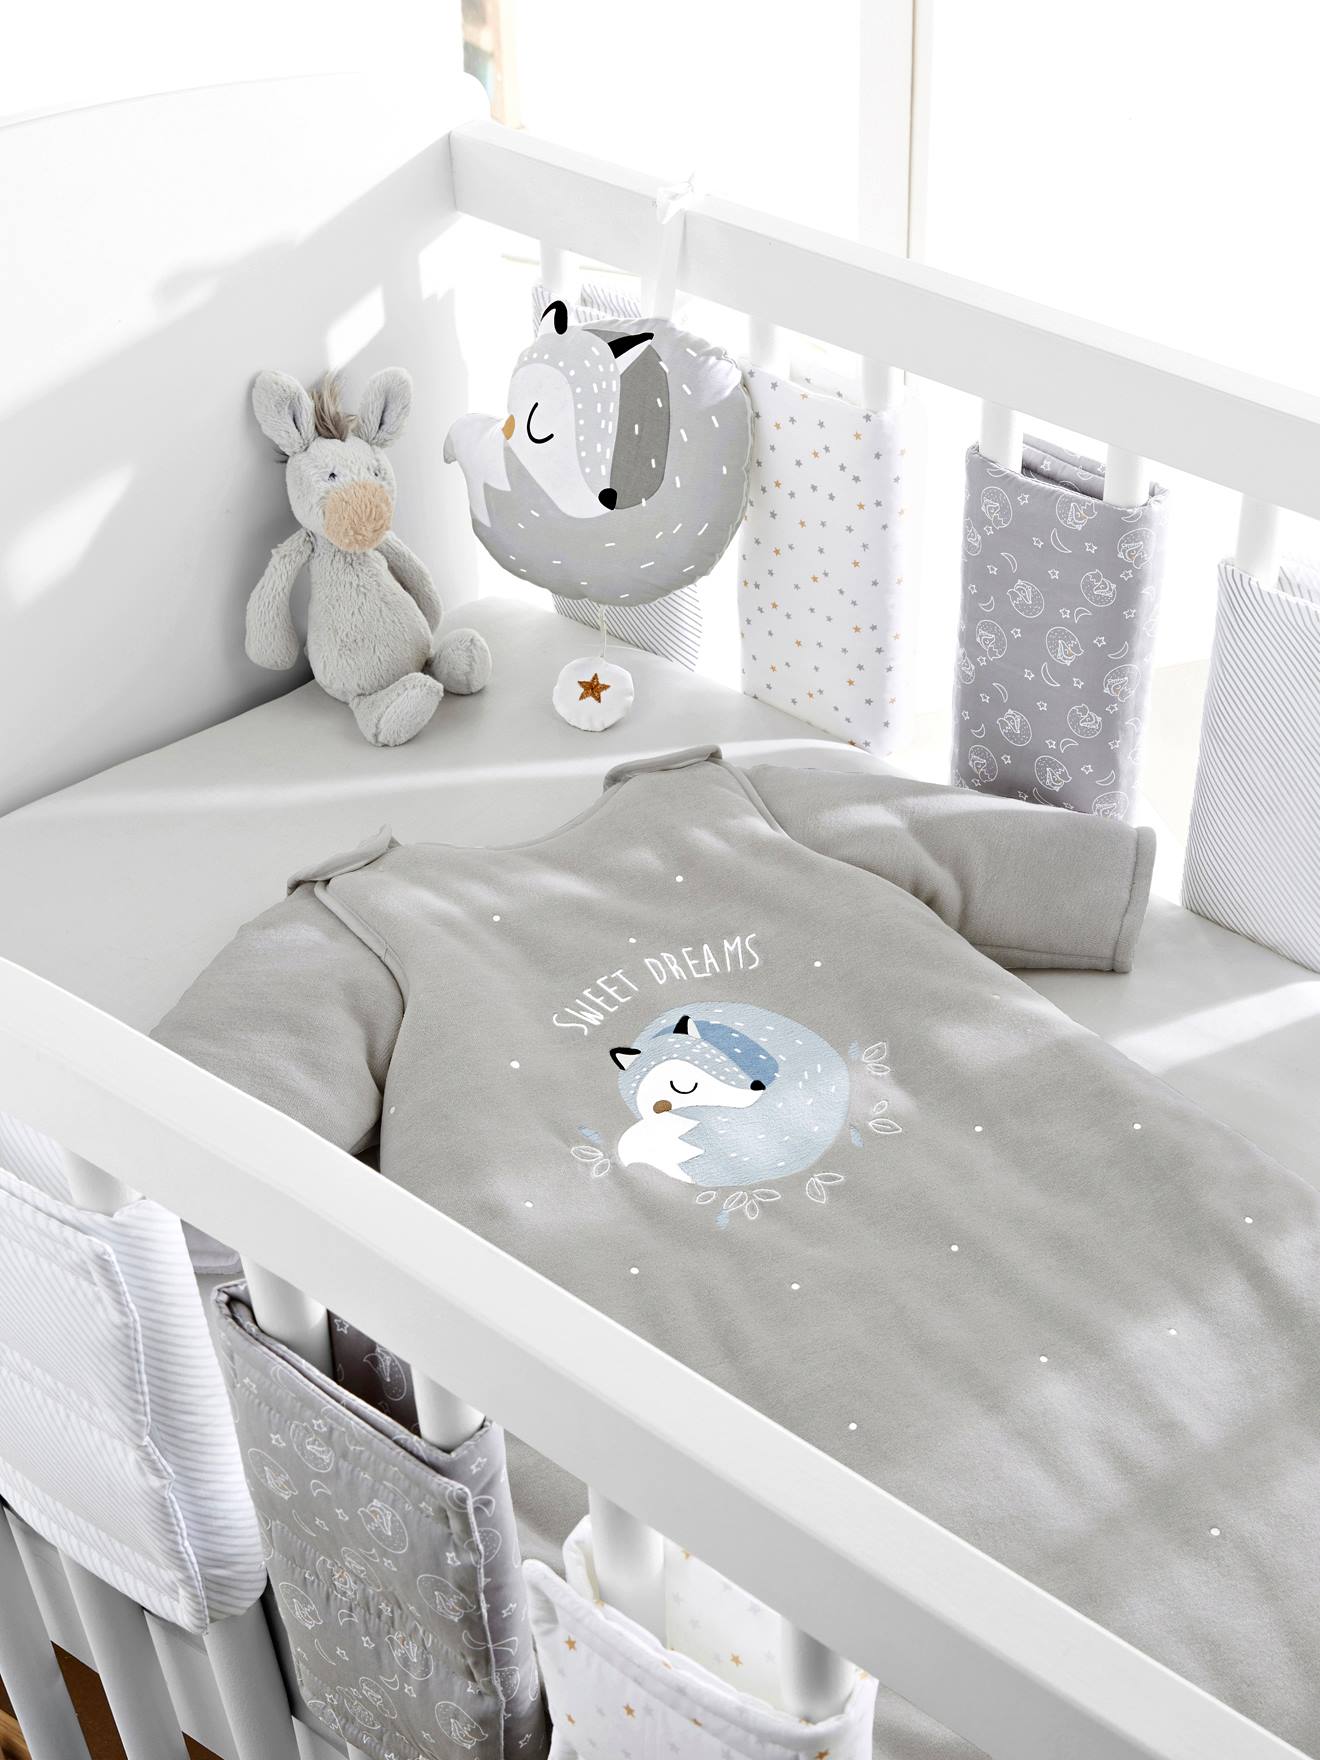 baby cot bed decoration